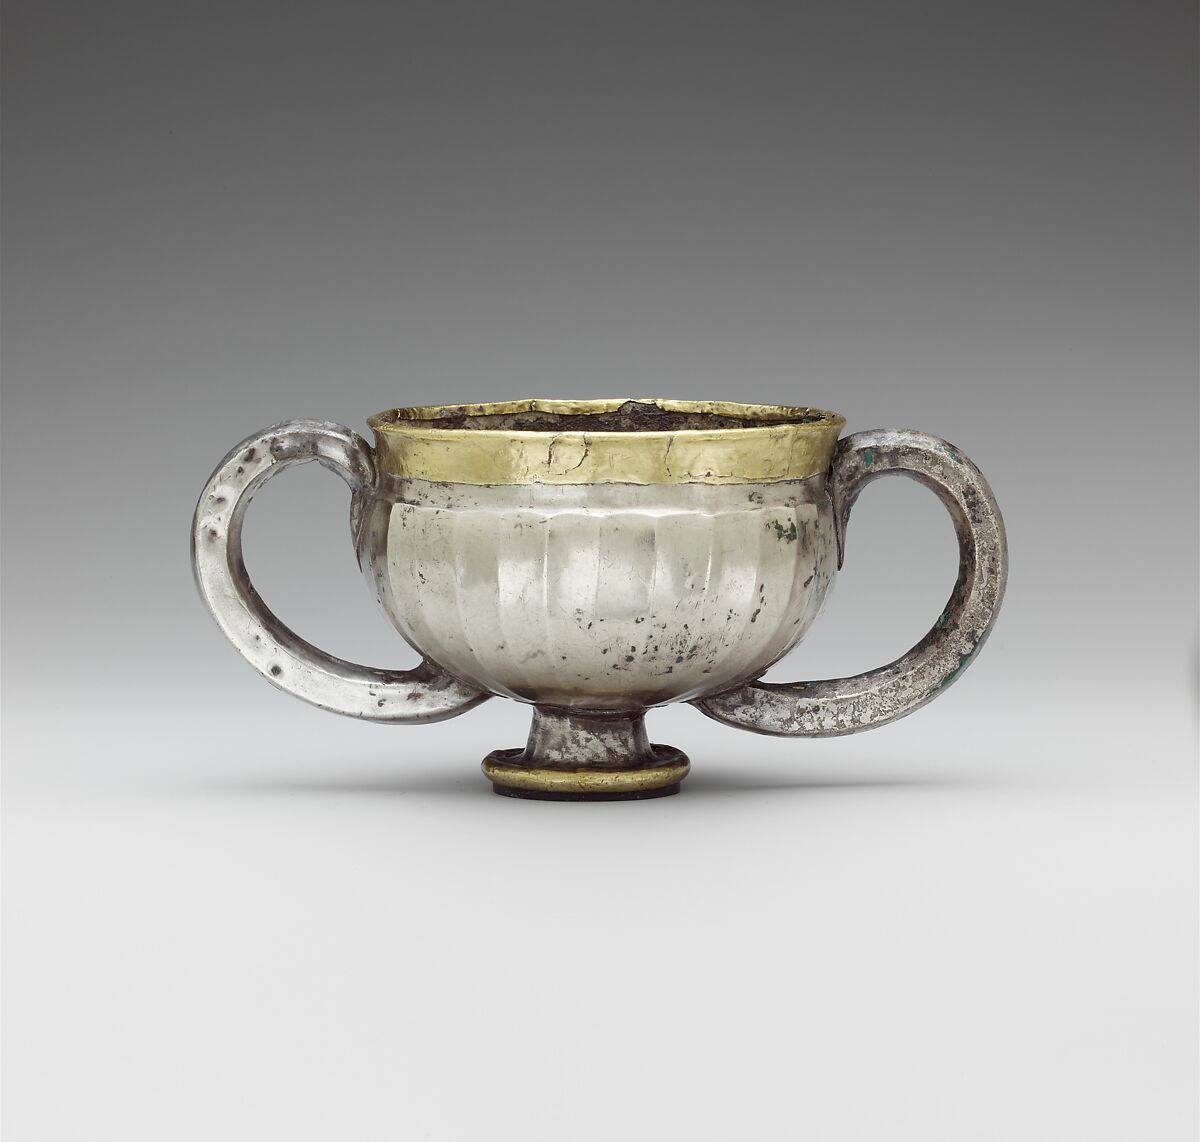 Gilded silver cup with two handles, Silver, gold foil, Anatolian 